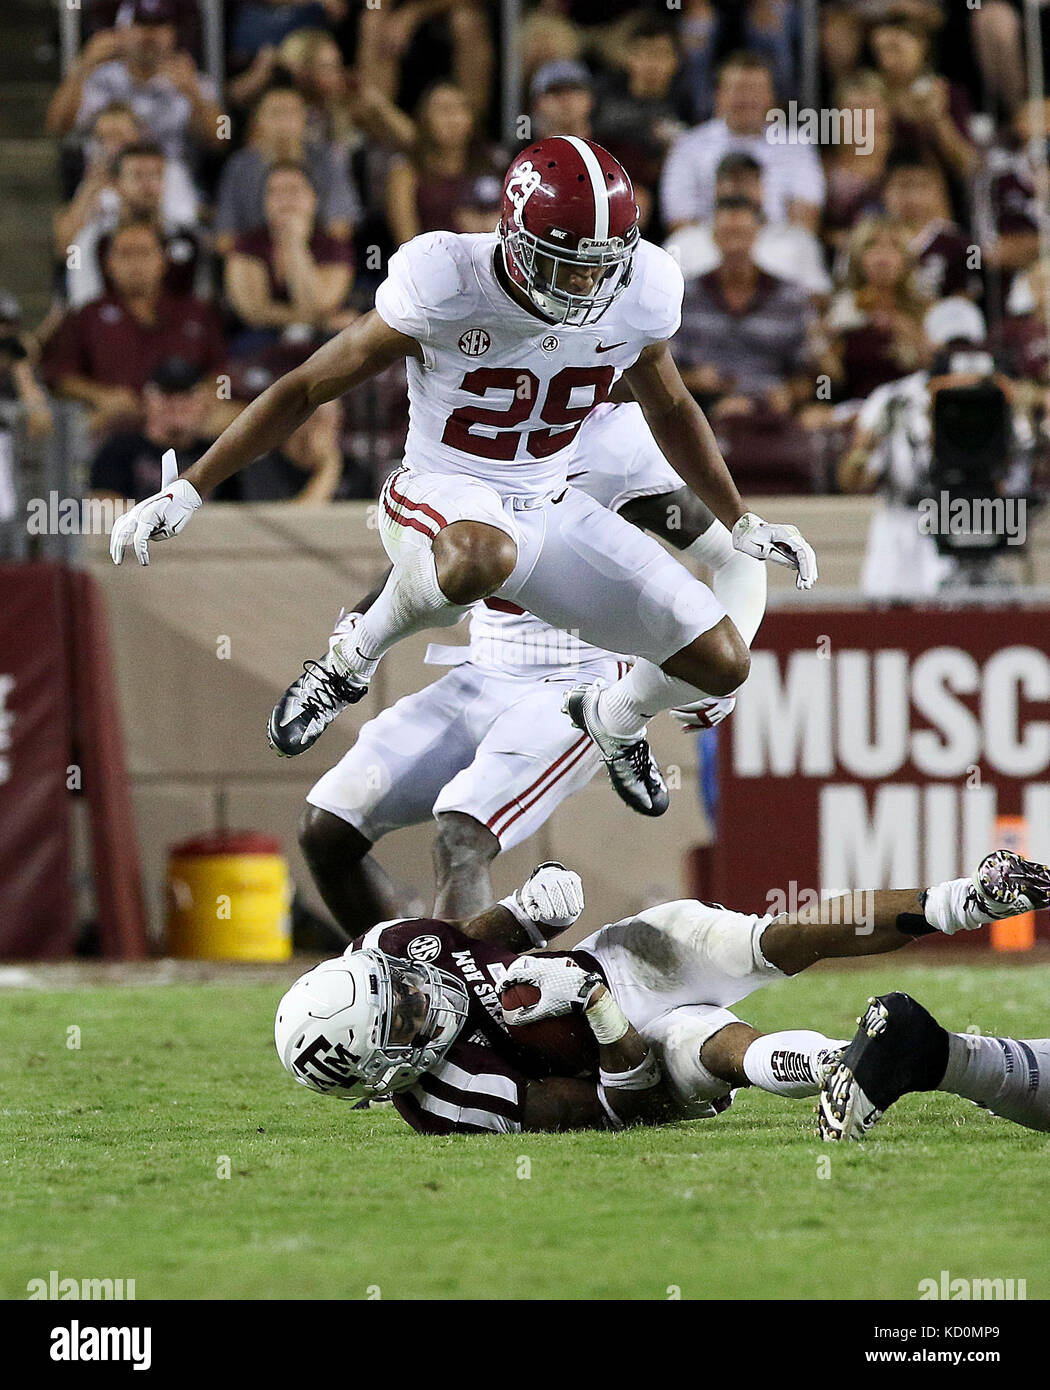 October 6, 2017: Alabama Crimson Tide defensive back Minkah Fitzpatrick (29) leaps over Texas A&M Aggies running back Trayveon Williams (5) during the NCAA football game between the Alabama Crimson Tide and the Texas A&M Aggies at Kyle Field in College Station, TX; John Glaser/CSM. Stock Photo